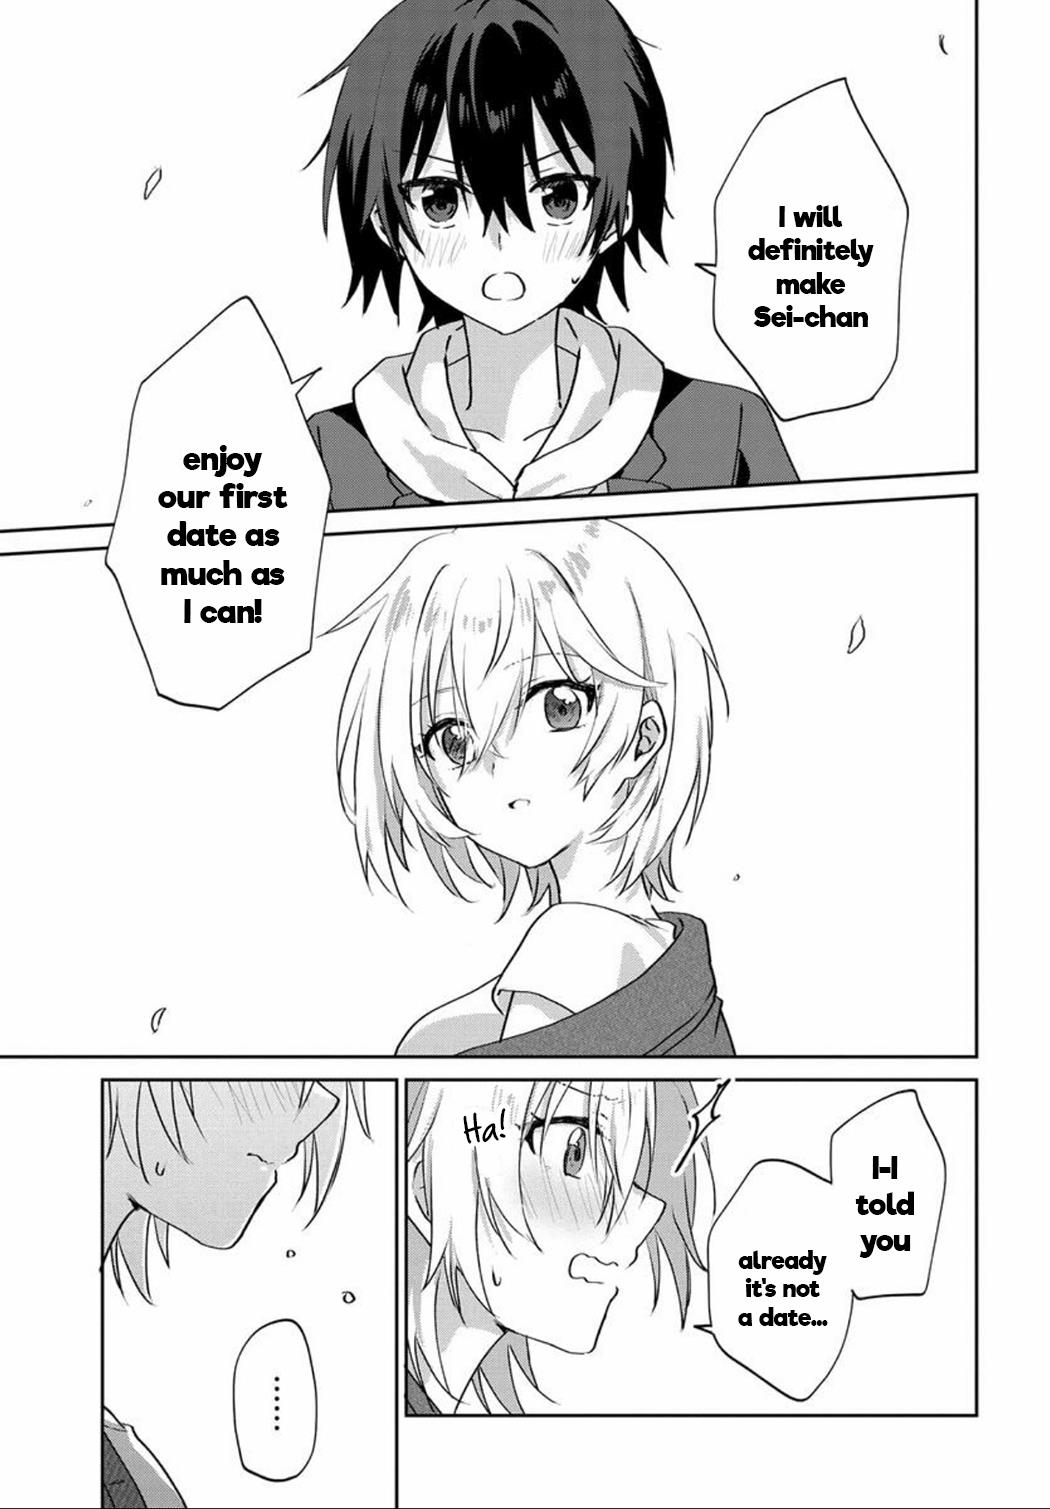 Since I’Ve Entered The World Of Romantic Comedy Manga, I’Ll Do My Best To Make The Losing Heroine Happy Chapter 6.2 #2